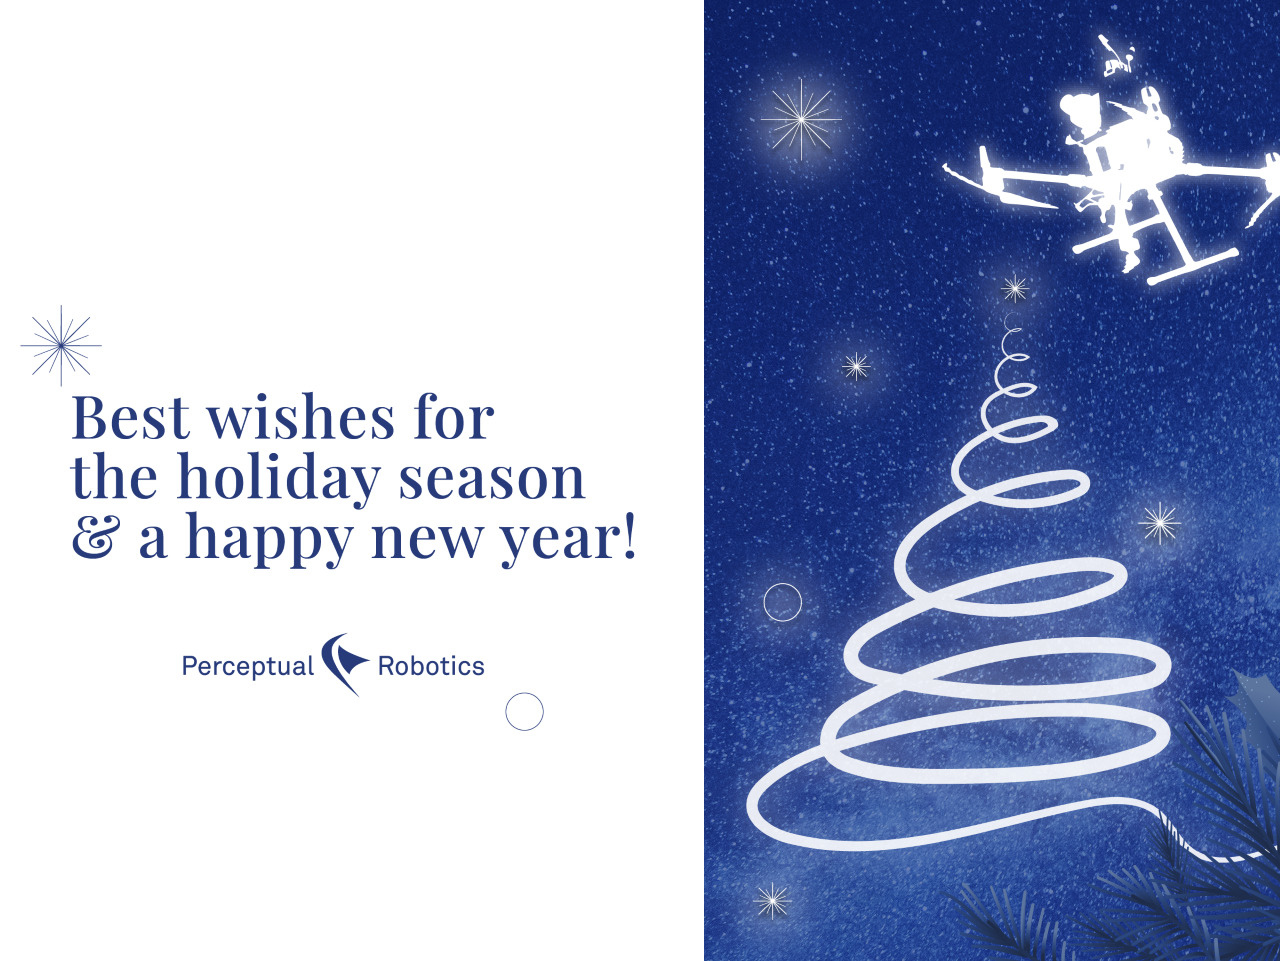 This is a holiday card with an image of a Christmas tree and a drone.